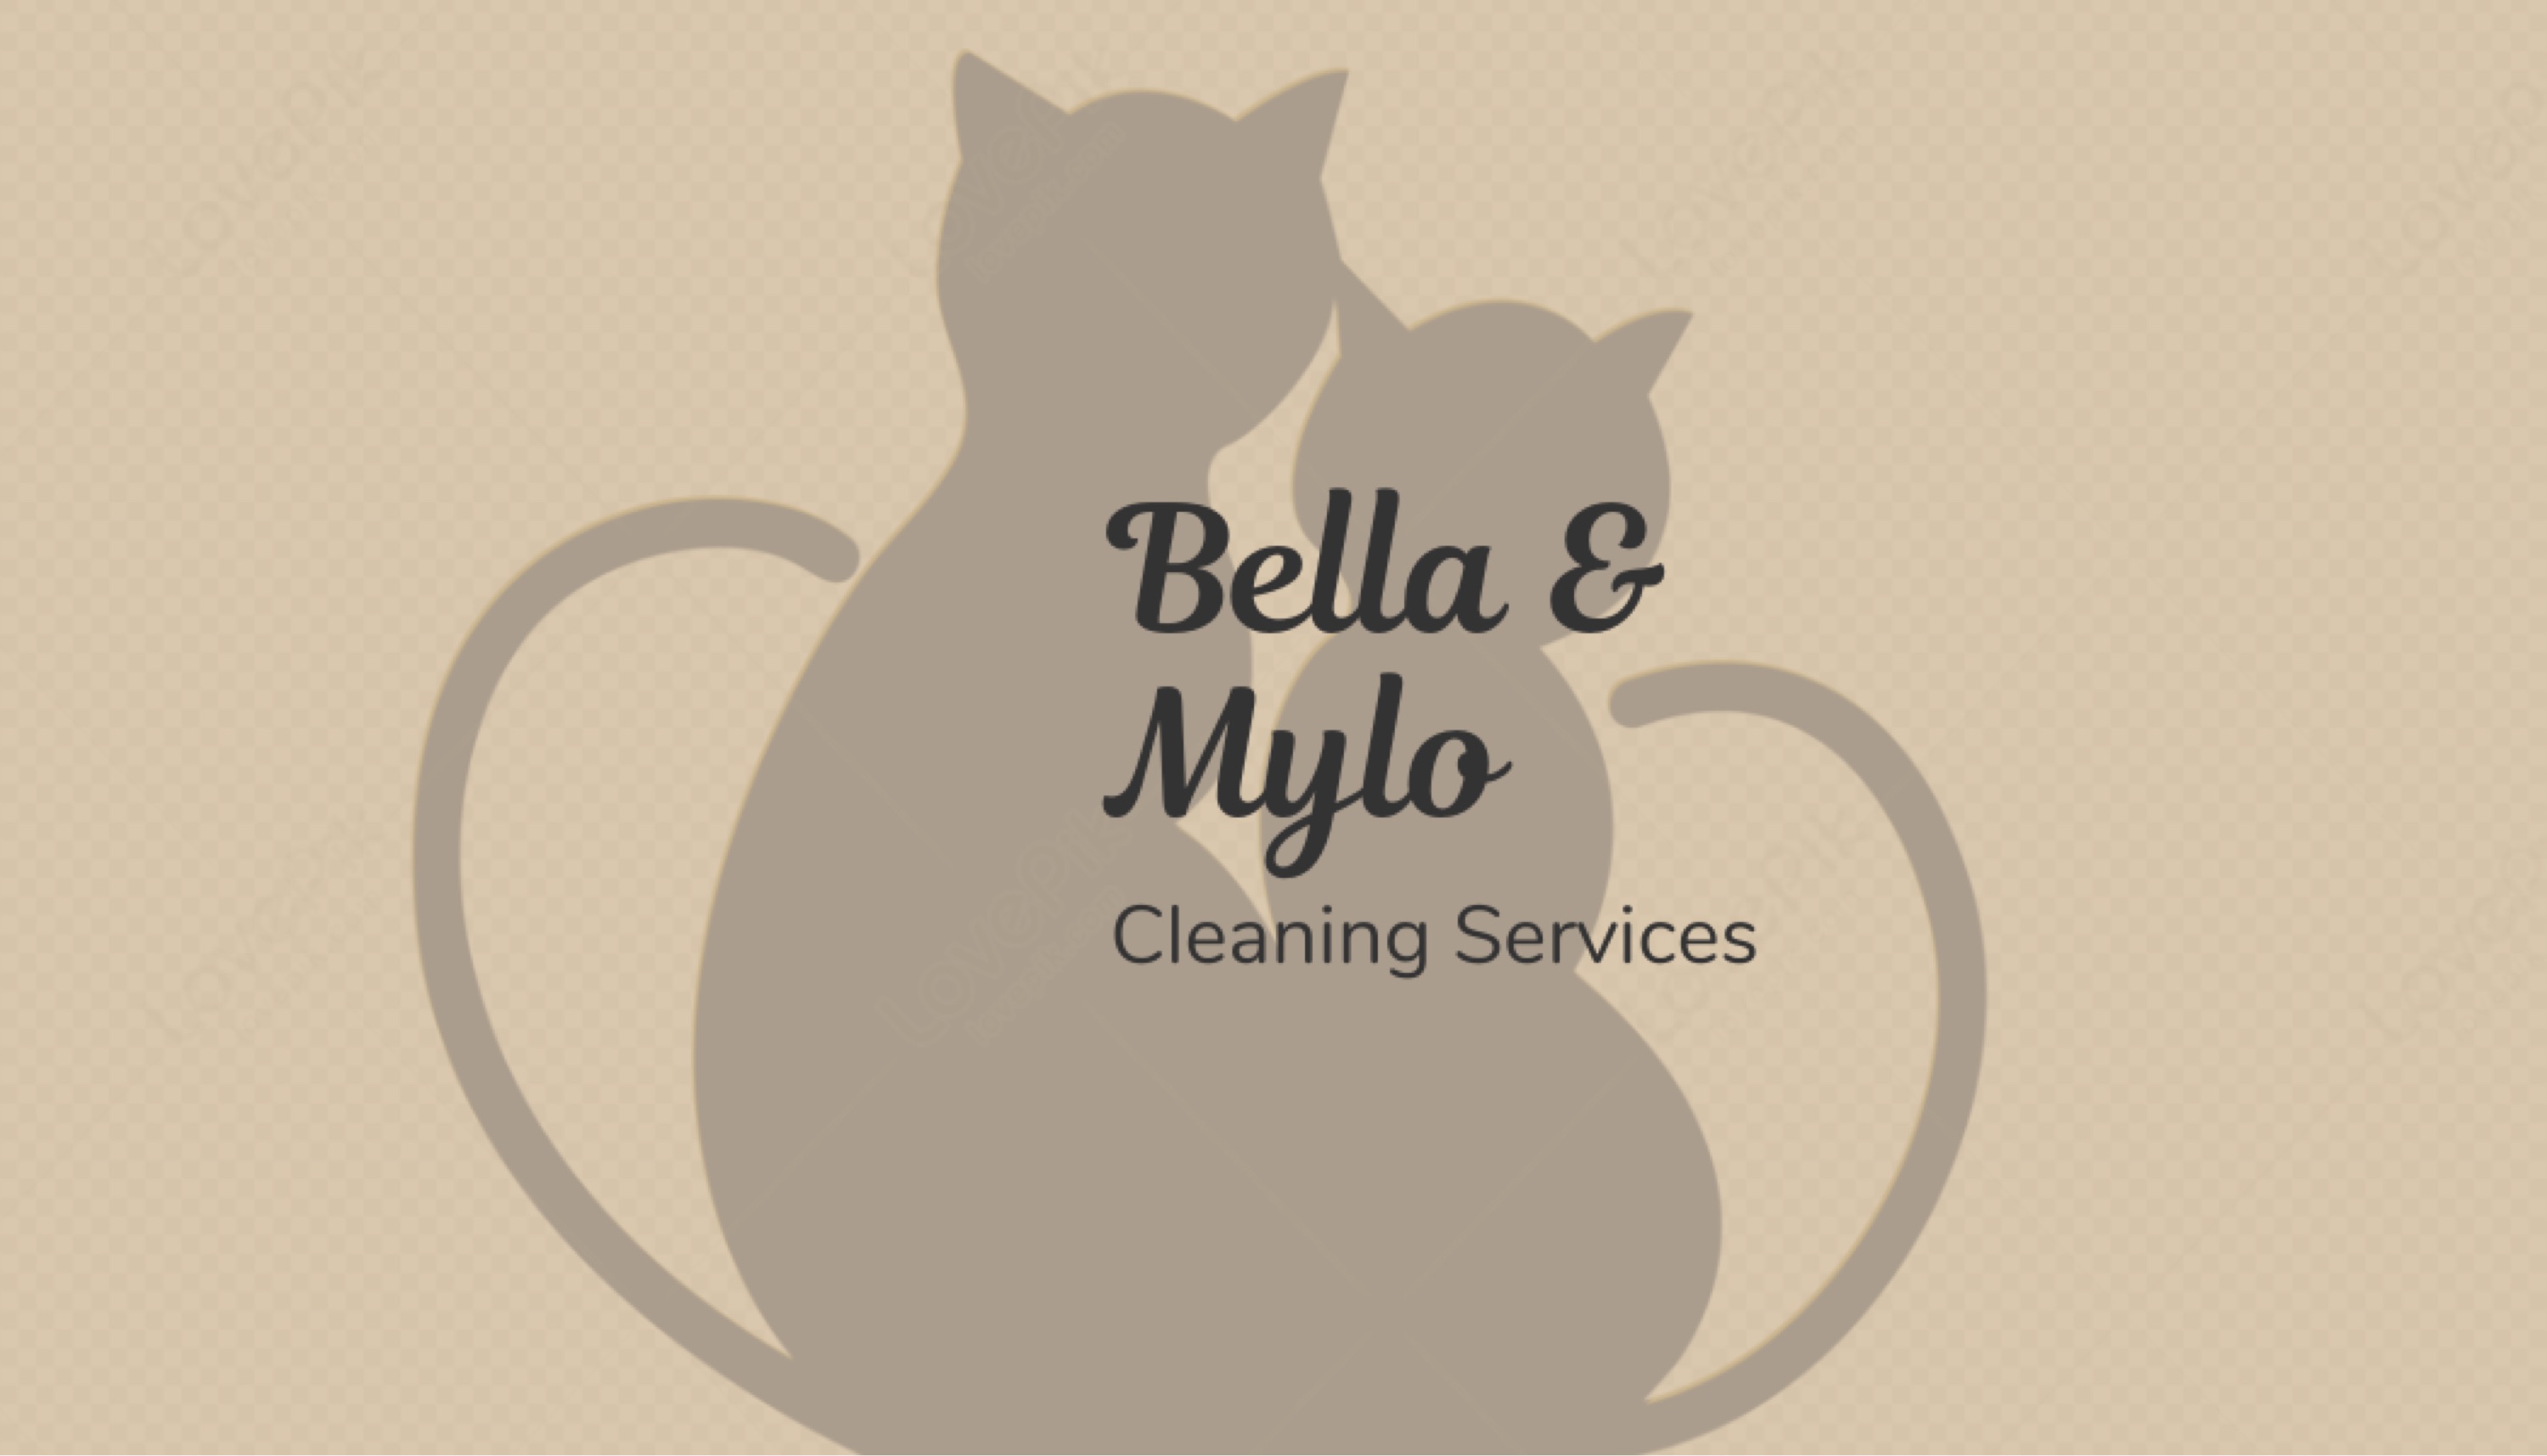 Mylo Bella Cleaning Services Logo